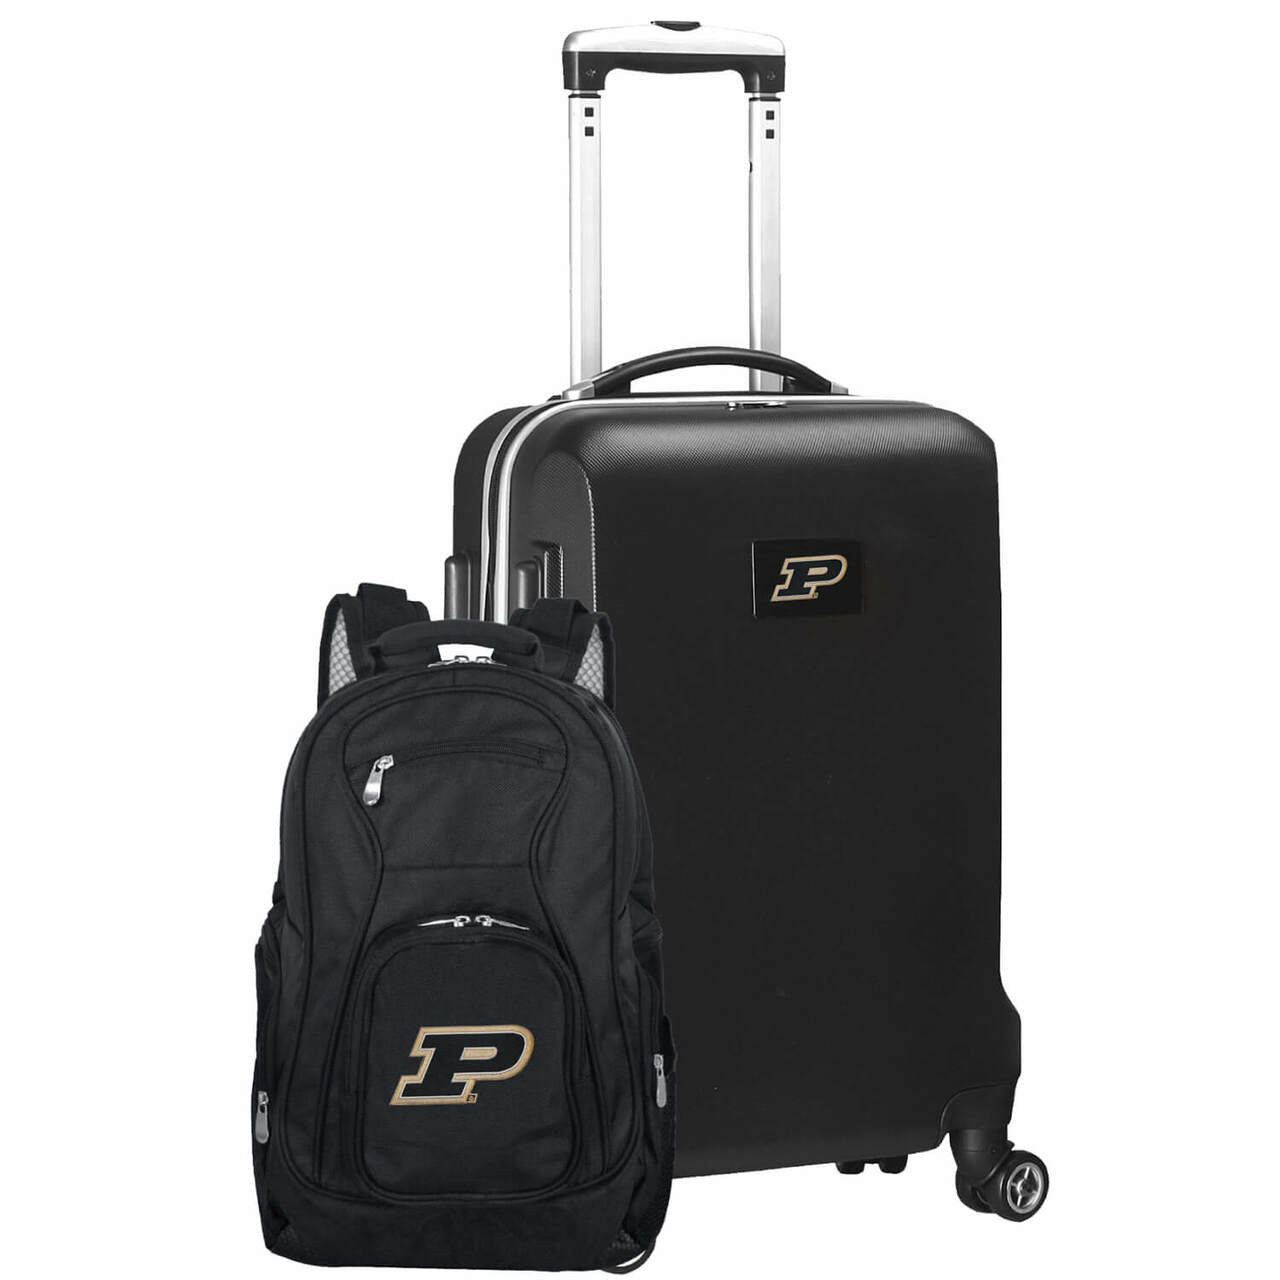 Purdue Boilermakers Deluxe 2-Piece Backpack and Carry on Set in Black